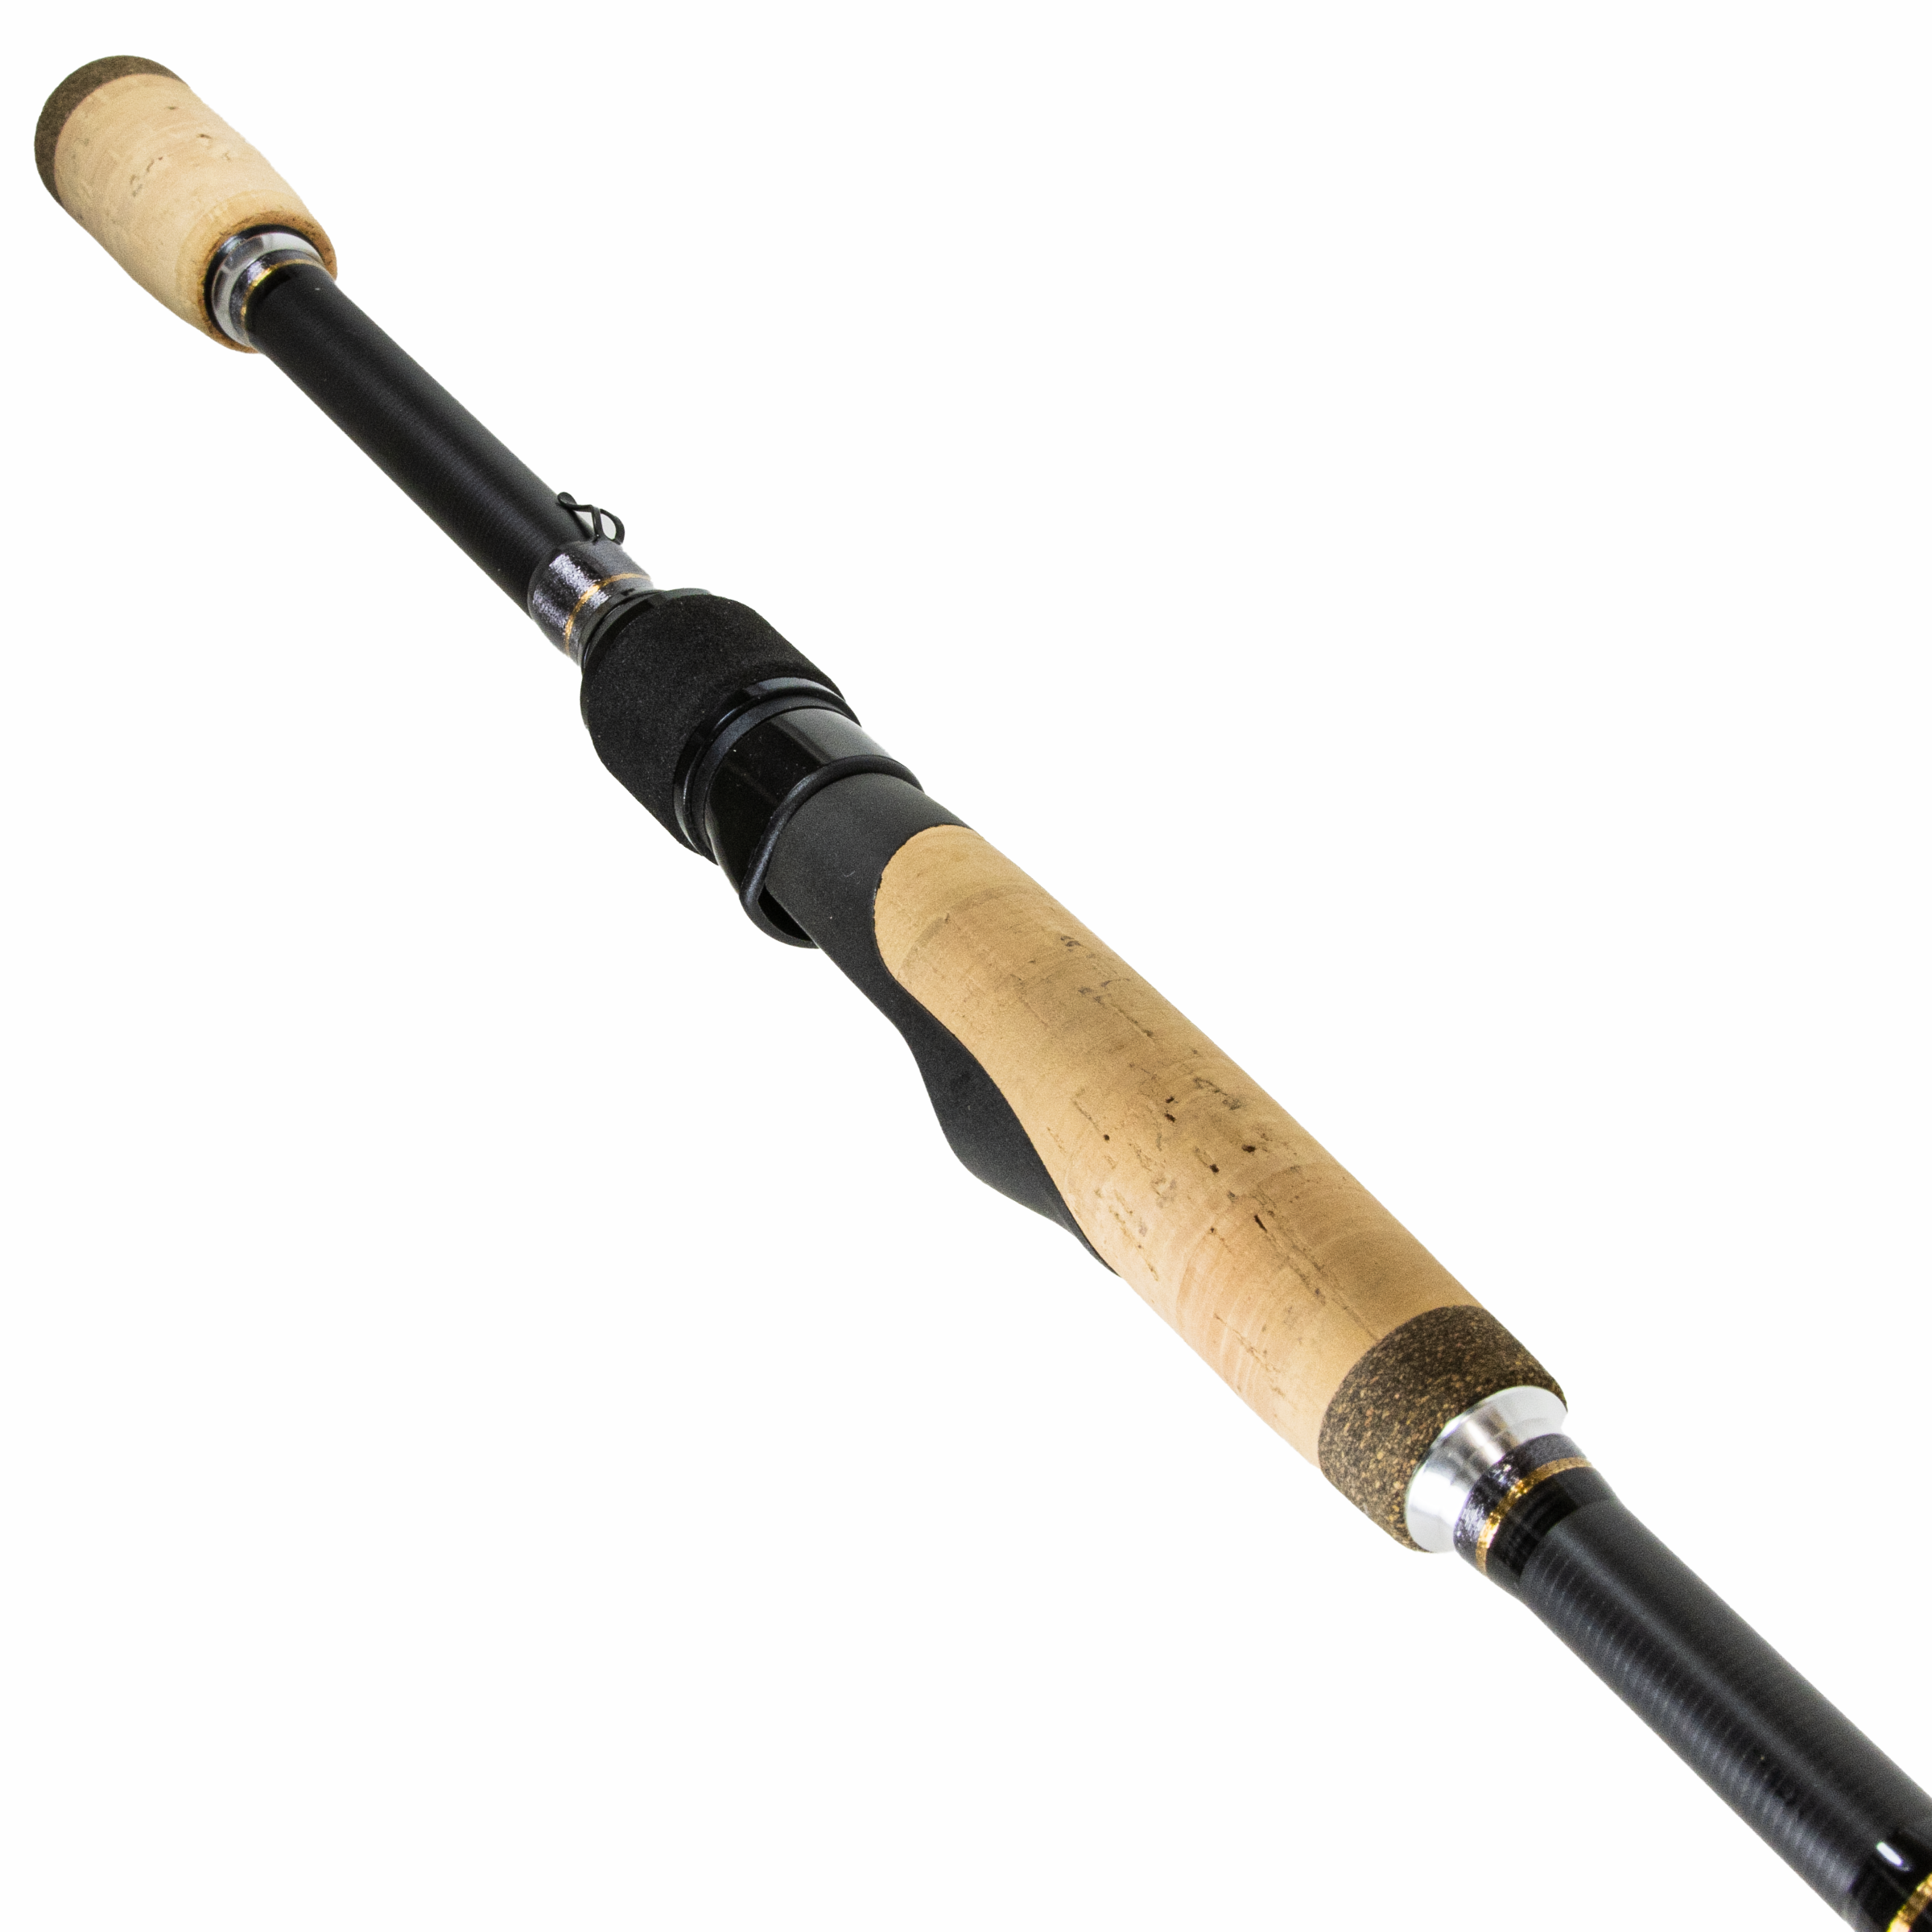 Best Dropshot Rods In 2020 – Top Reviews With Comparison! 